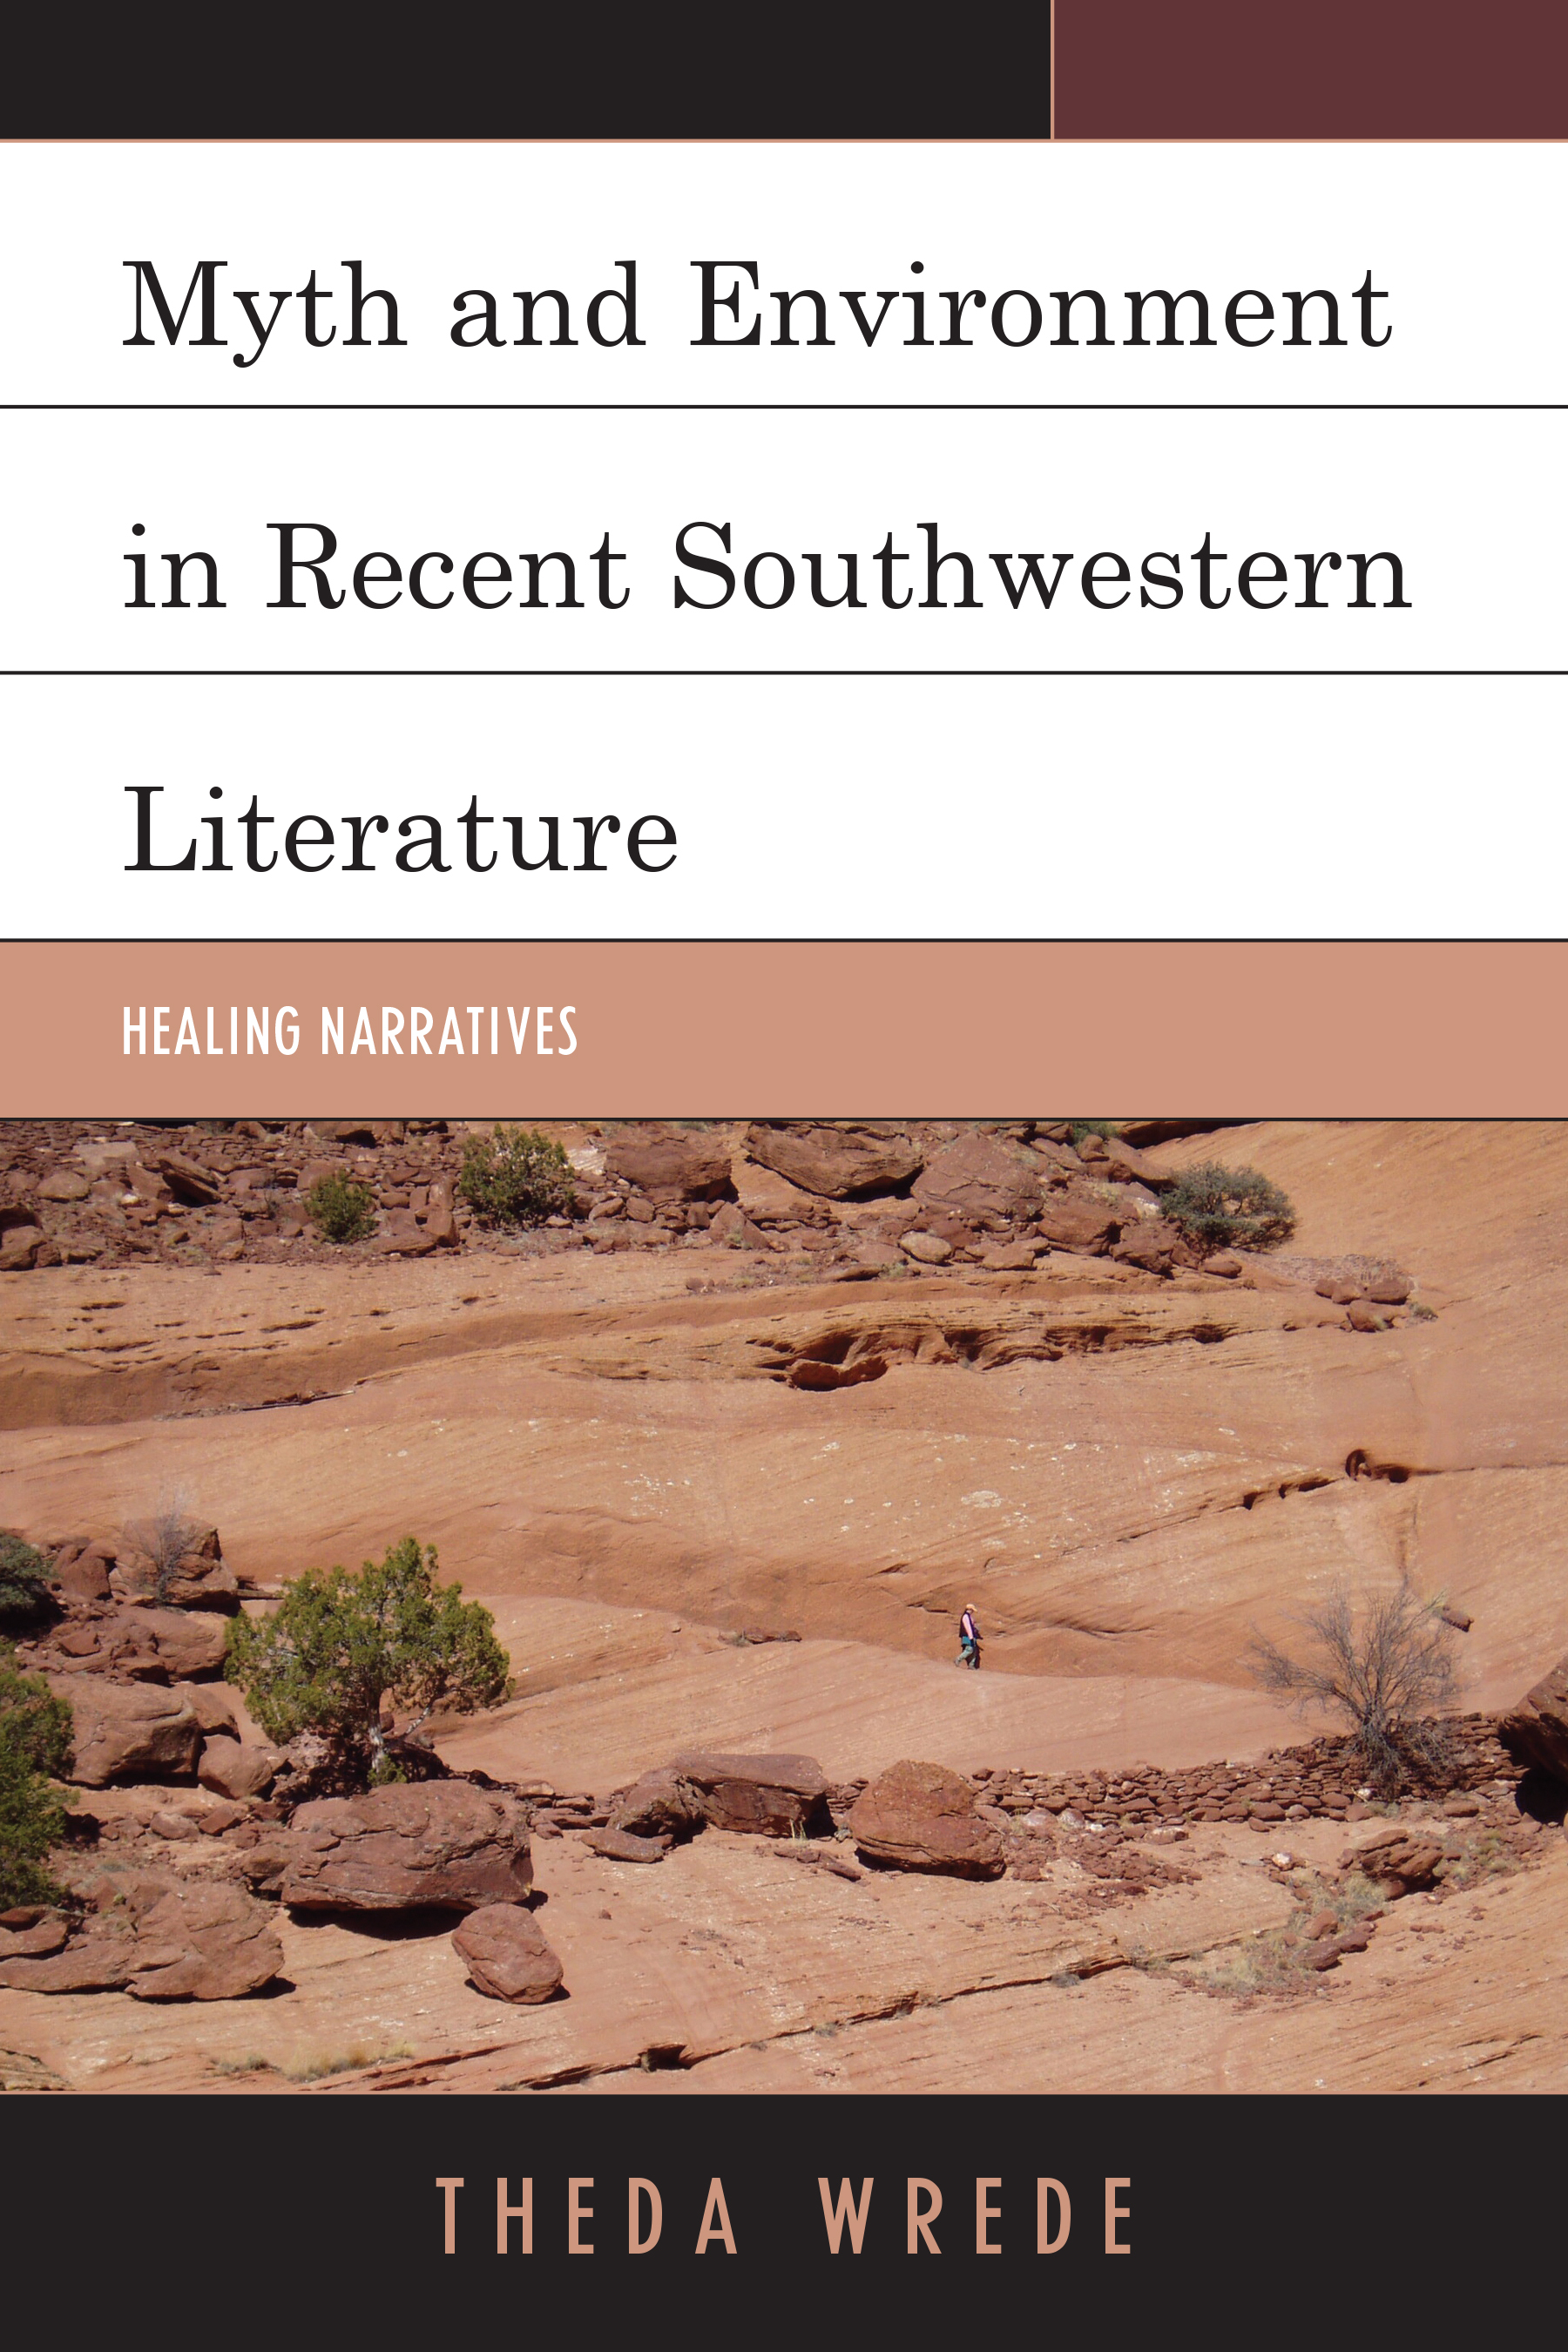 Myth and Environment in Recent Southwestern Literature: Healing Narratives